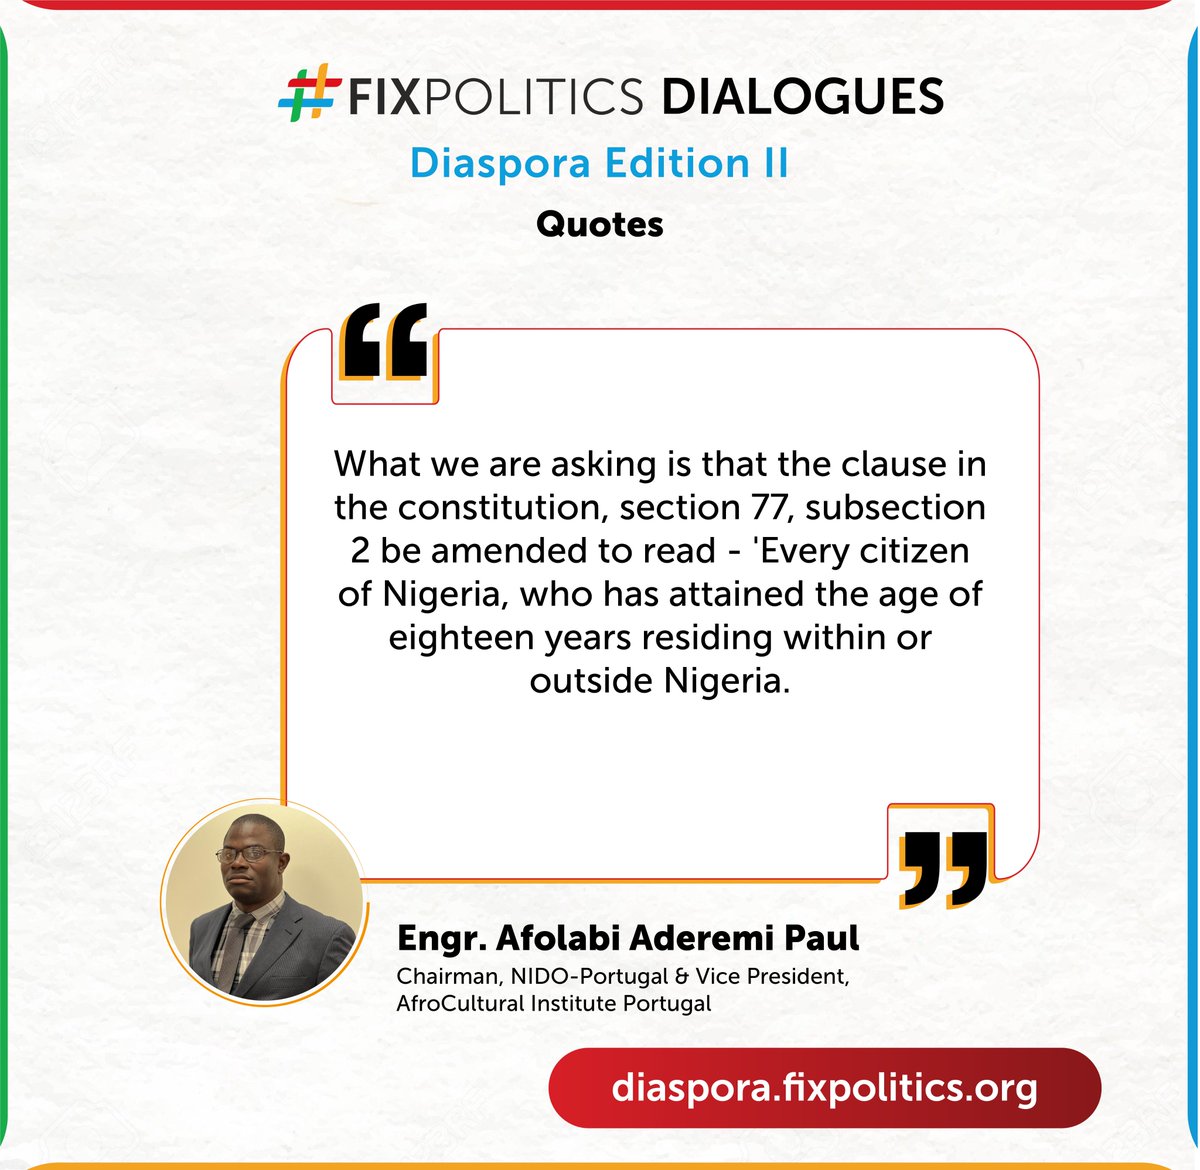 'What we are asking is that the clause in section 77 be amended to read 'Every citizen of Nigeria, who has attained the age of eighteen years, residing within or outside Nigeria'' - Engr. Afolabi Aderemi at the #FixPolitics Diaspora Dialogue II. Watch out for the next edition.